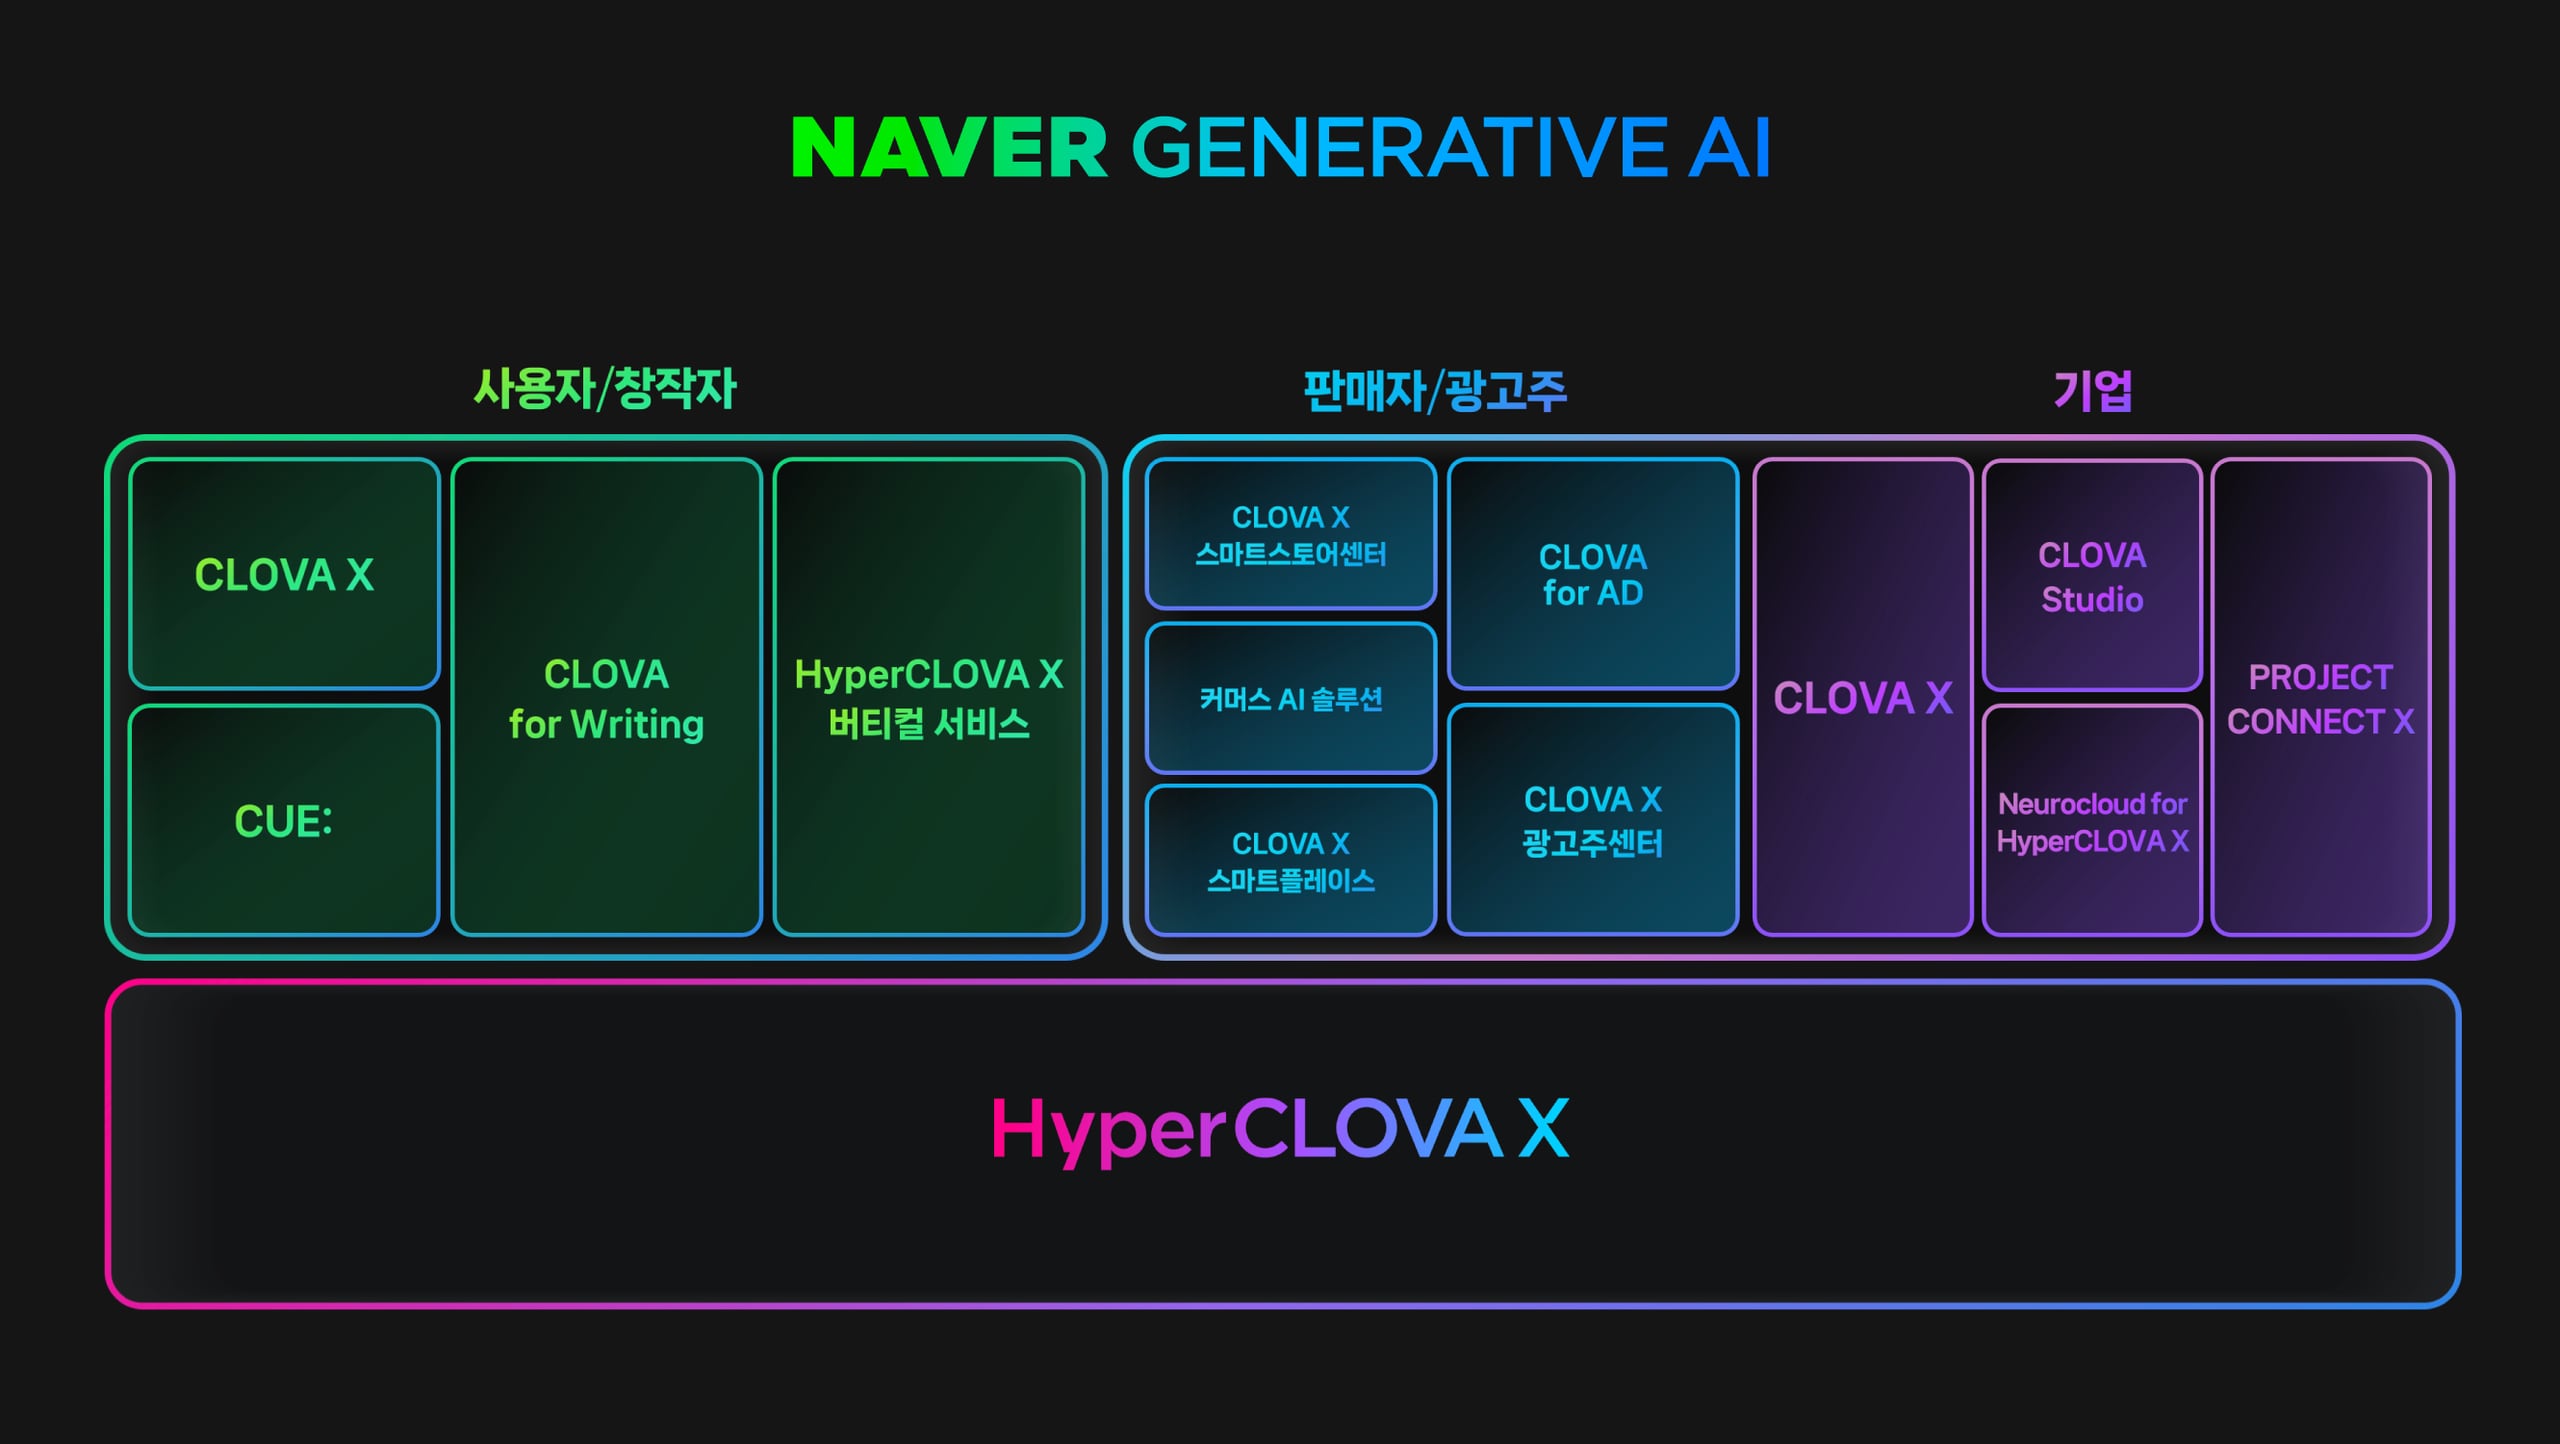 This image provided by Naver Corp. shows its hyperscale AI service HyperCLOVA X released on Aug. 23, 2023.